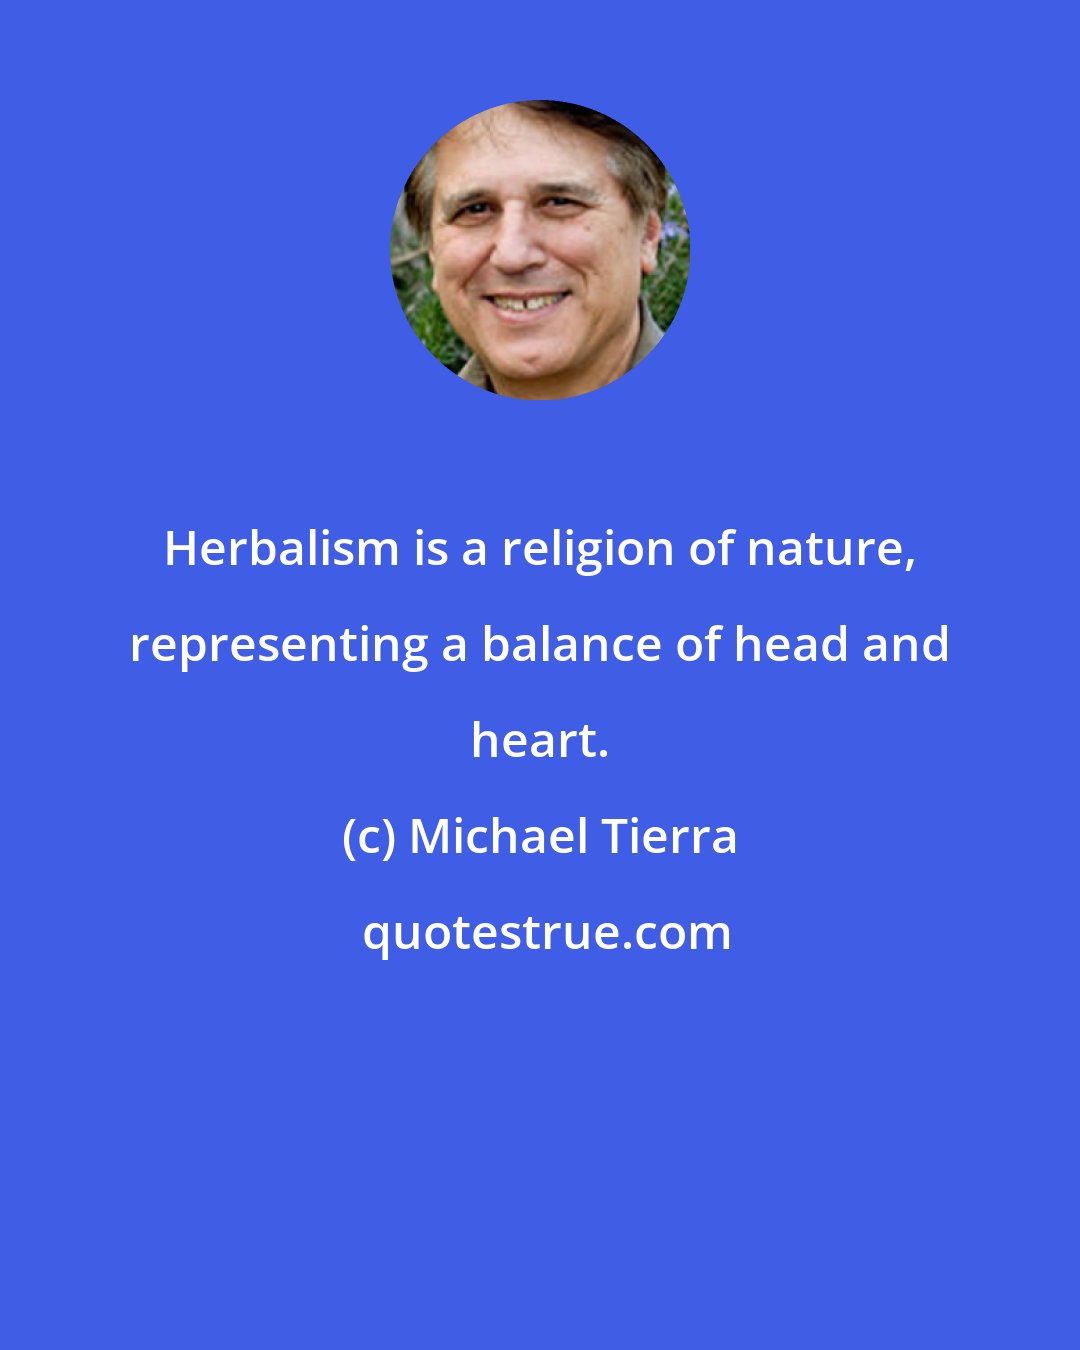 Michael Tierra: Herbalism is a religion of nature, representing a balance of head and heart.